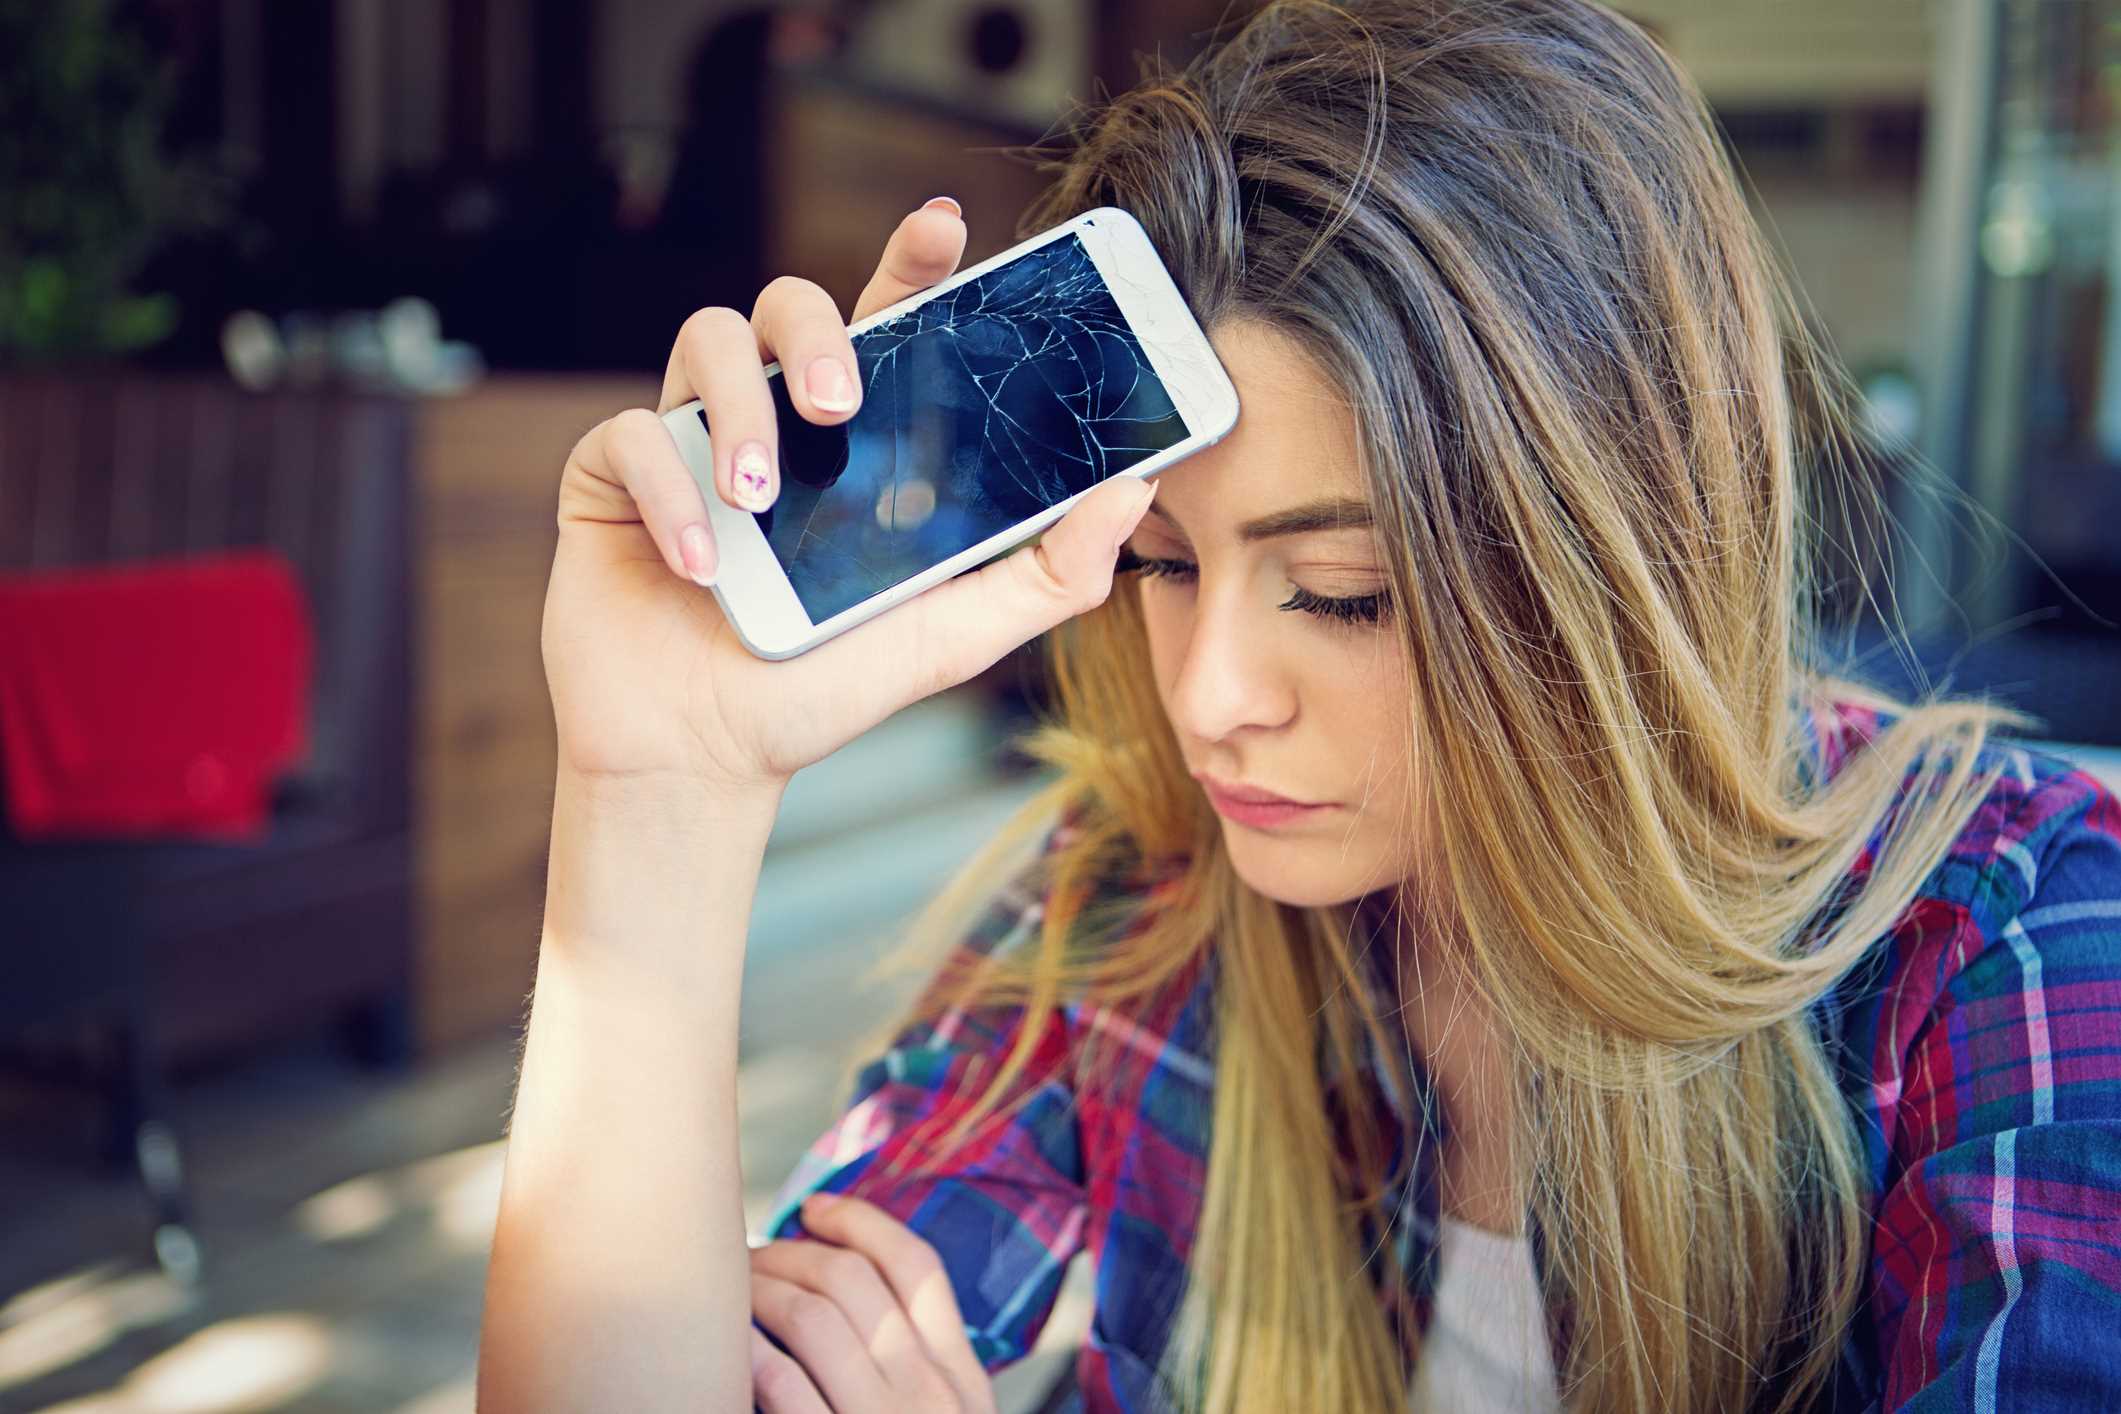 Distraught teenager holding non-working, shattered smartphone